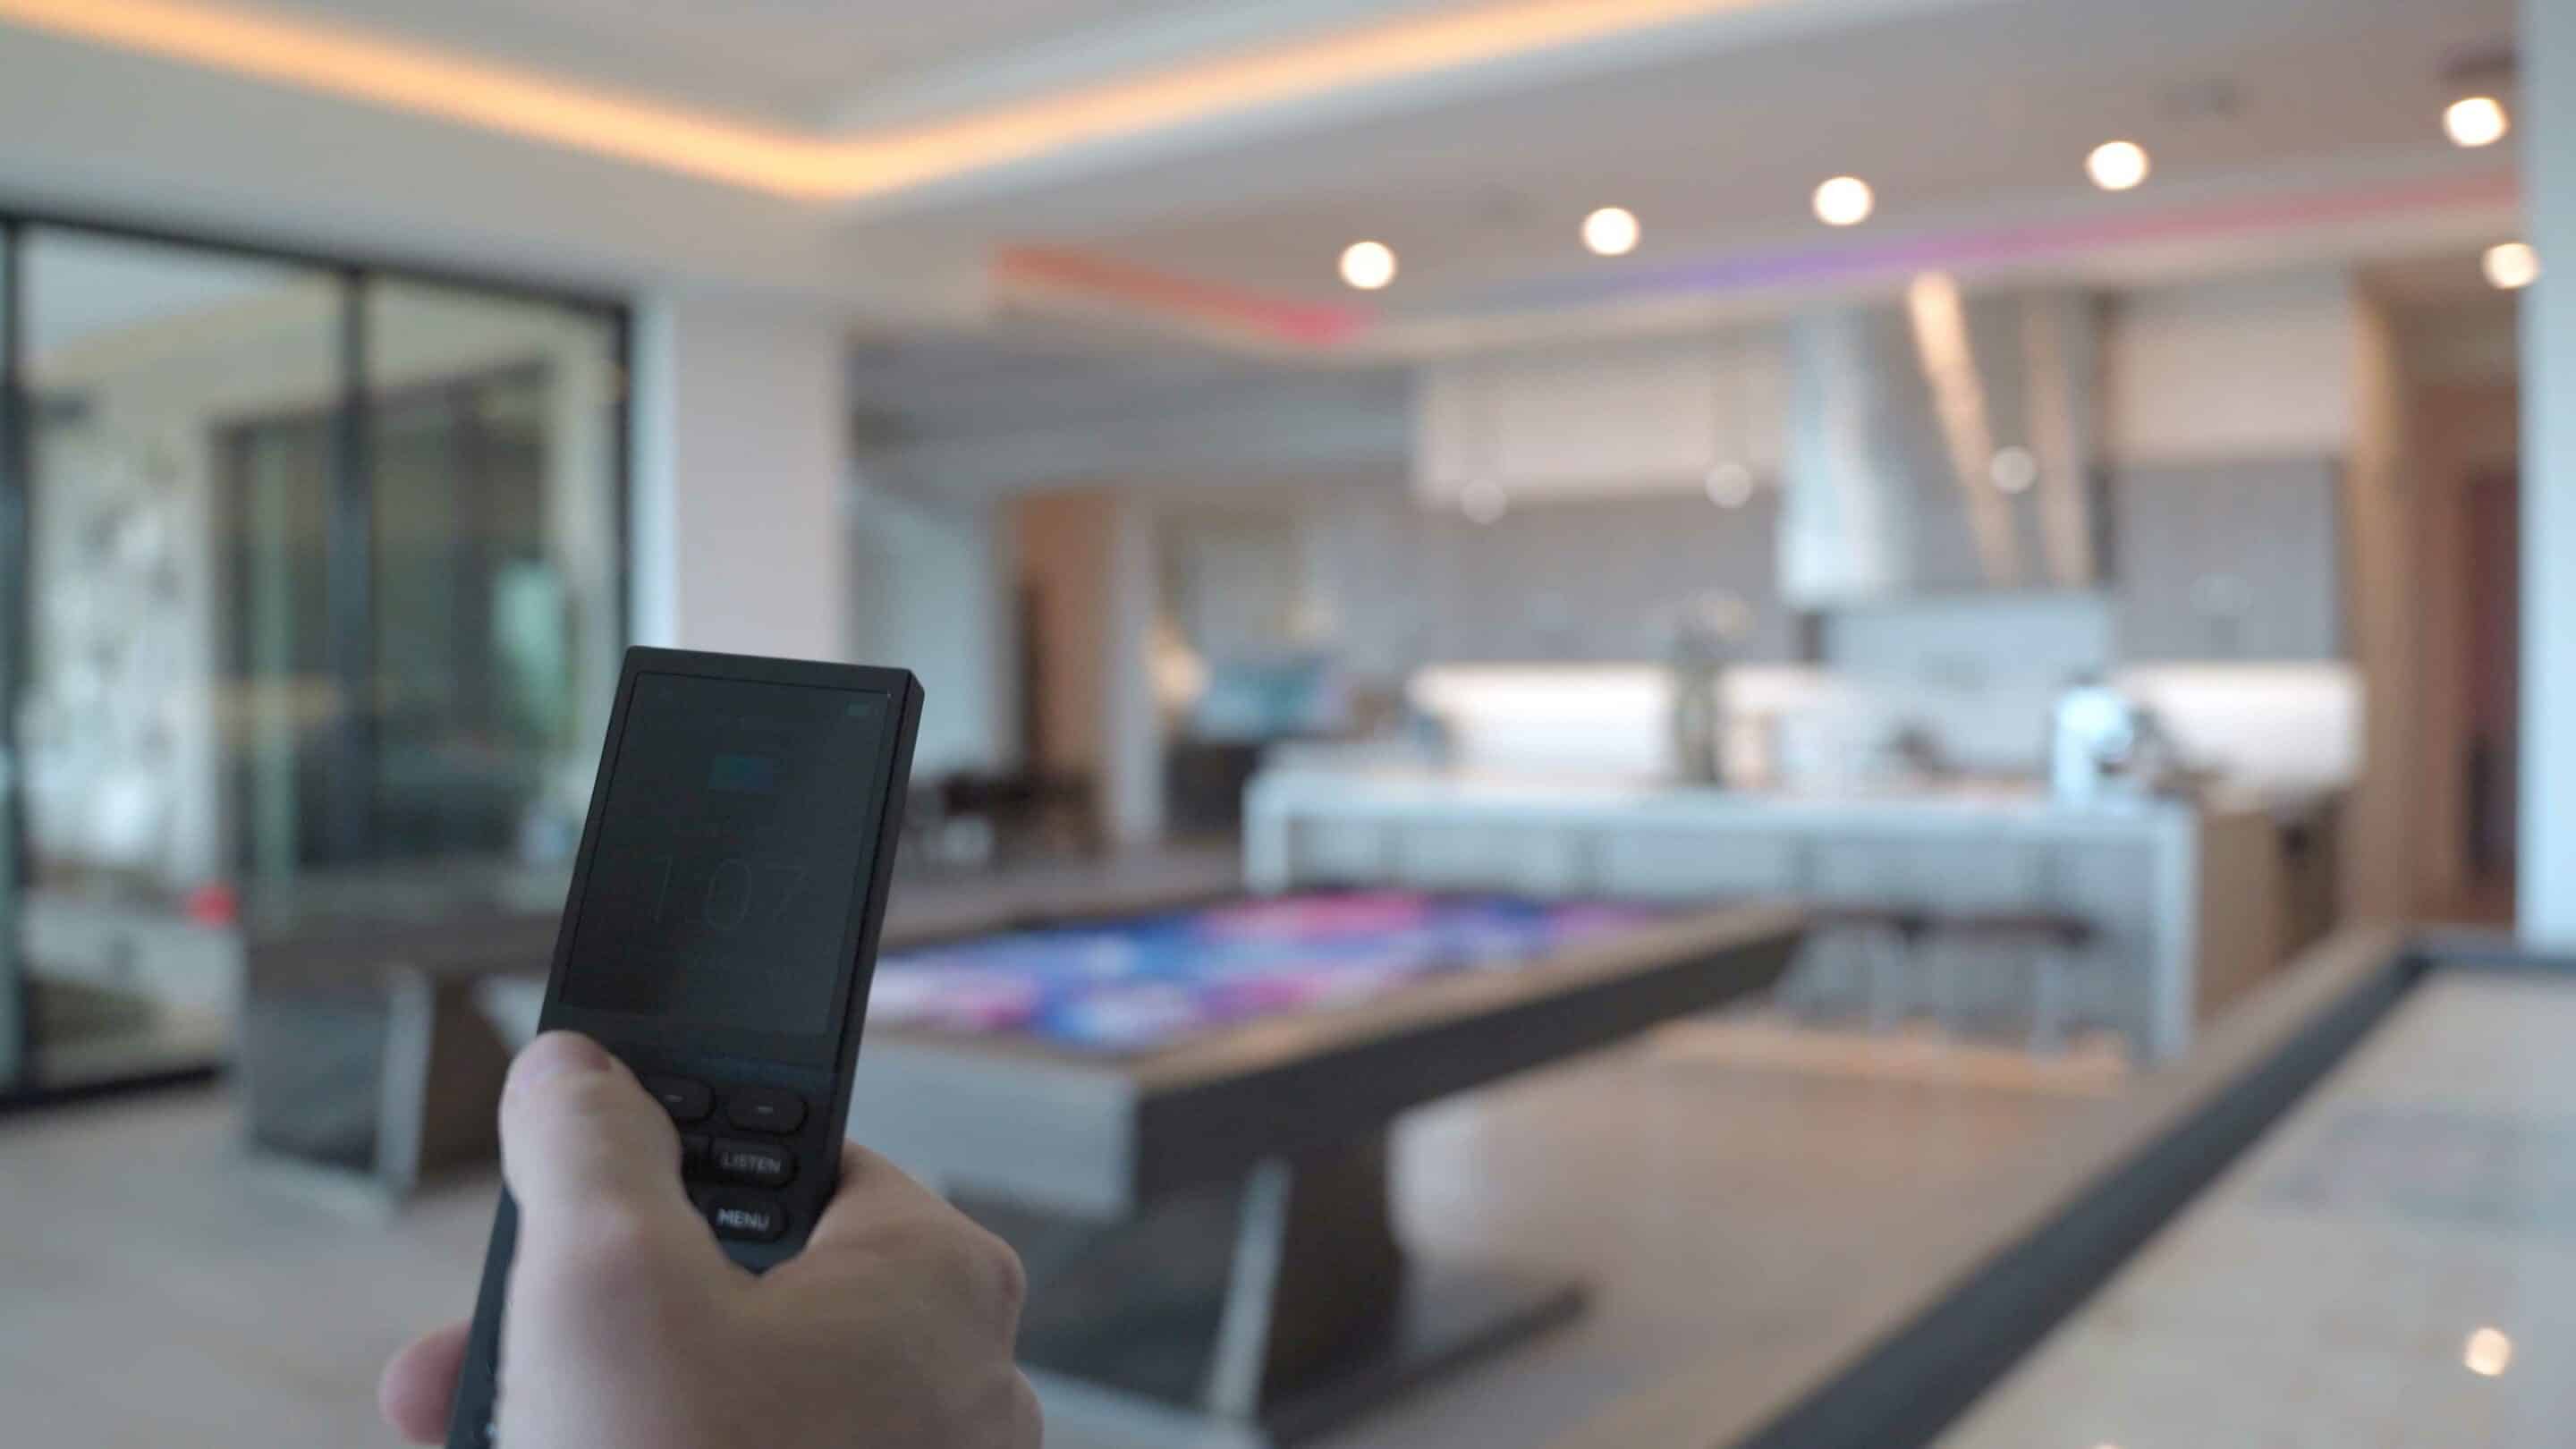 Nate hold remote control to control lighting in Mesa Smart Home